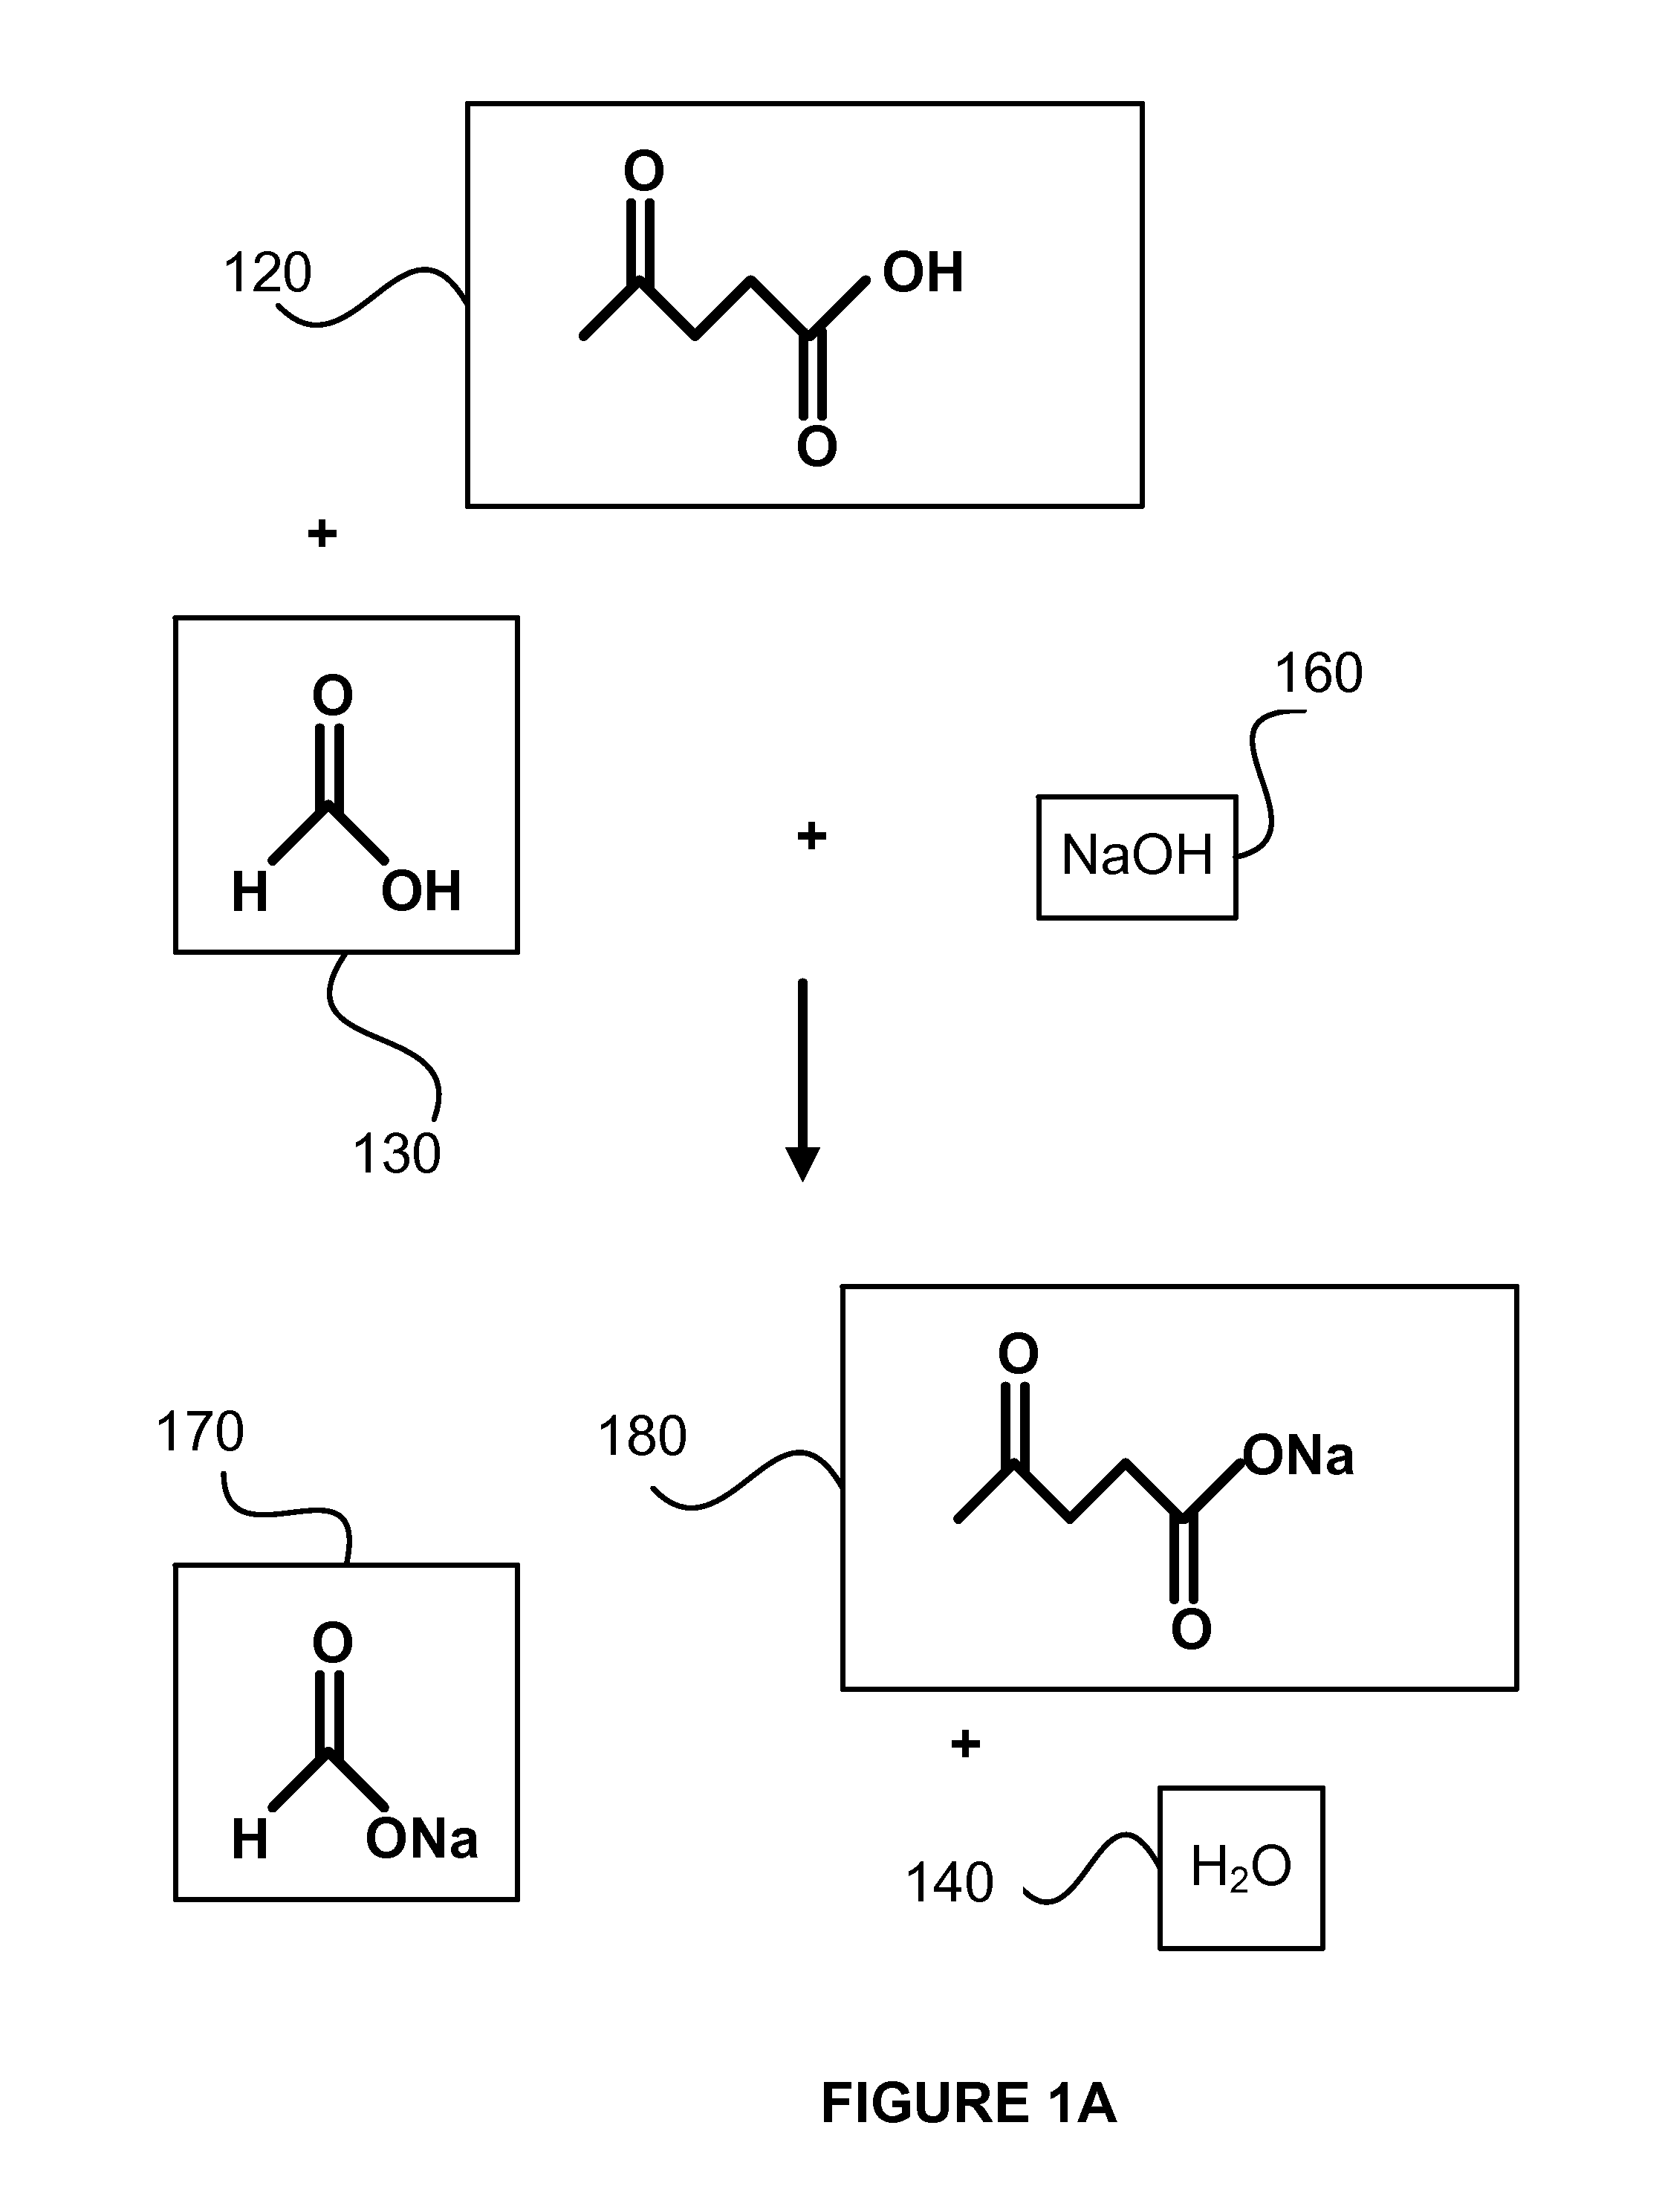 Decarboxylation of levulinic acid to ketone solvents